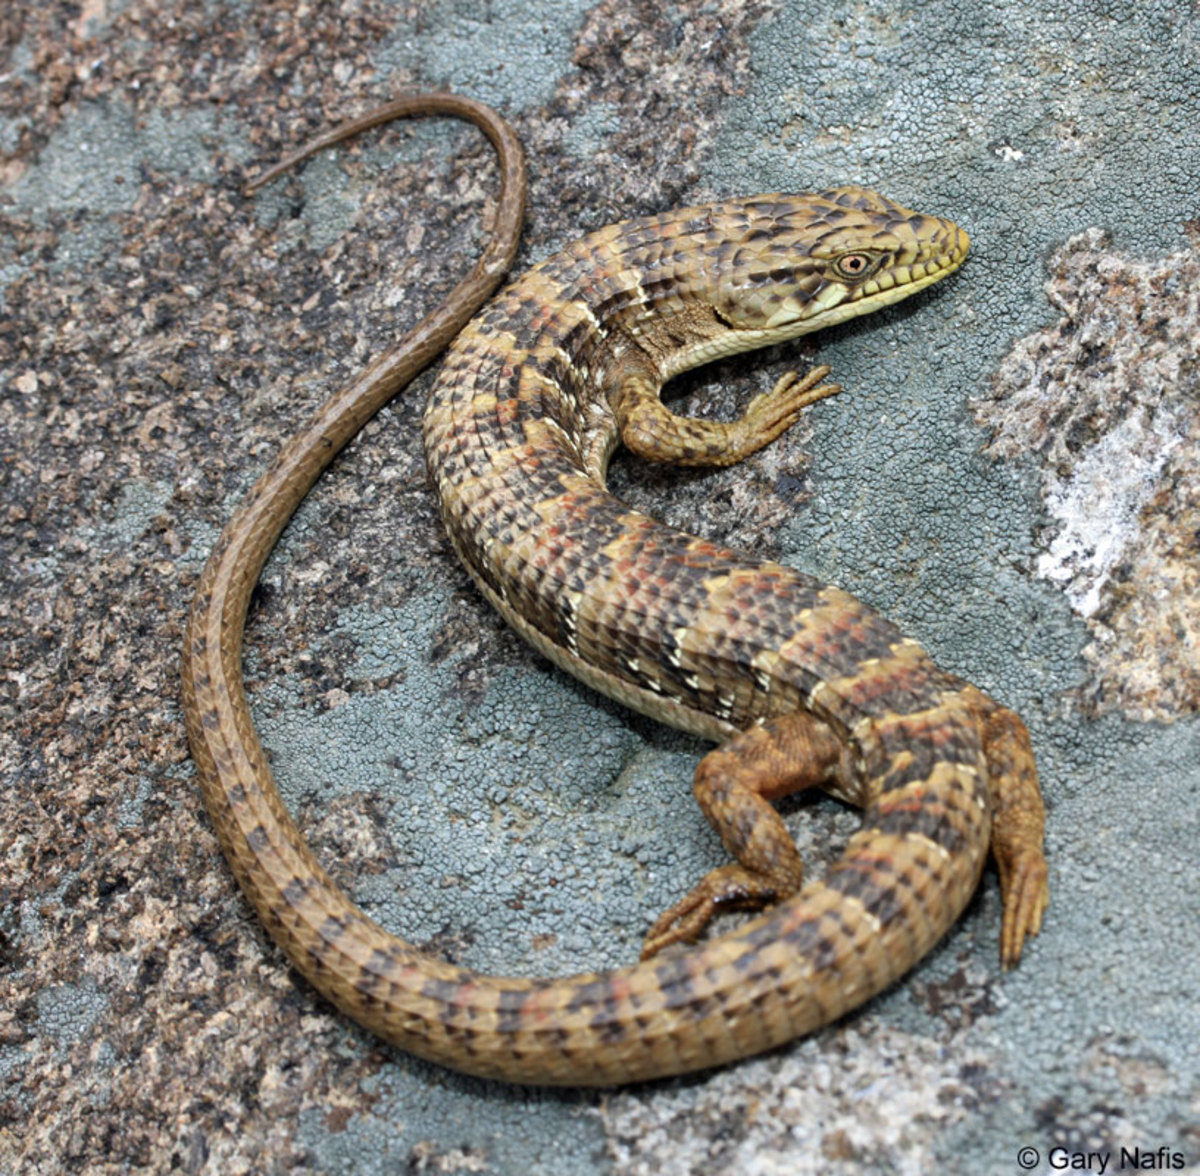 A Southern Alligator Lizard prefers rocks or walls for warmth and leaf litter for shelter. They are a great benefit for the pest control of grasshoppers.